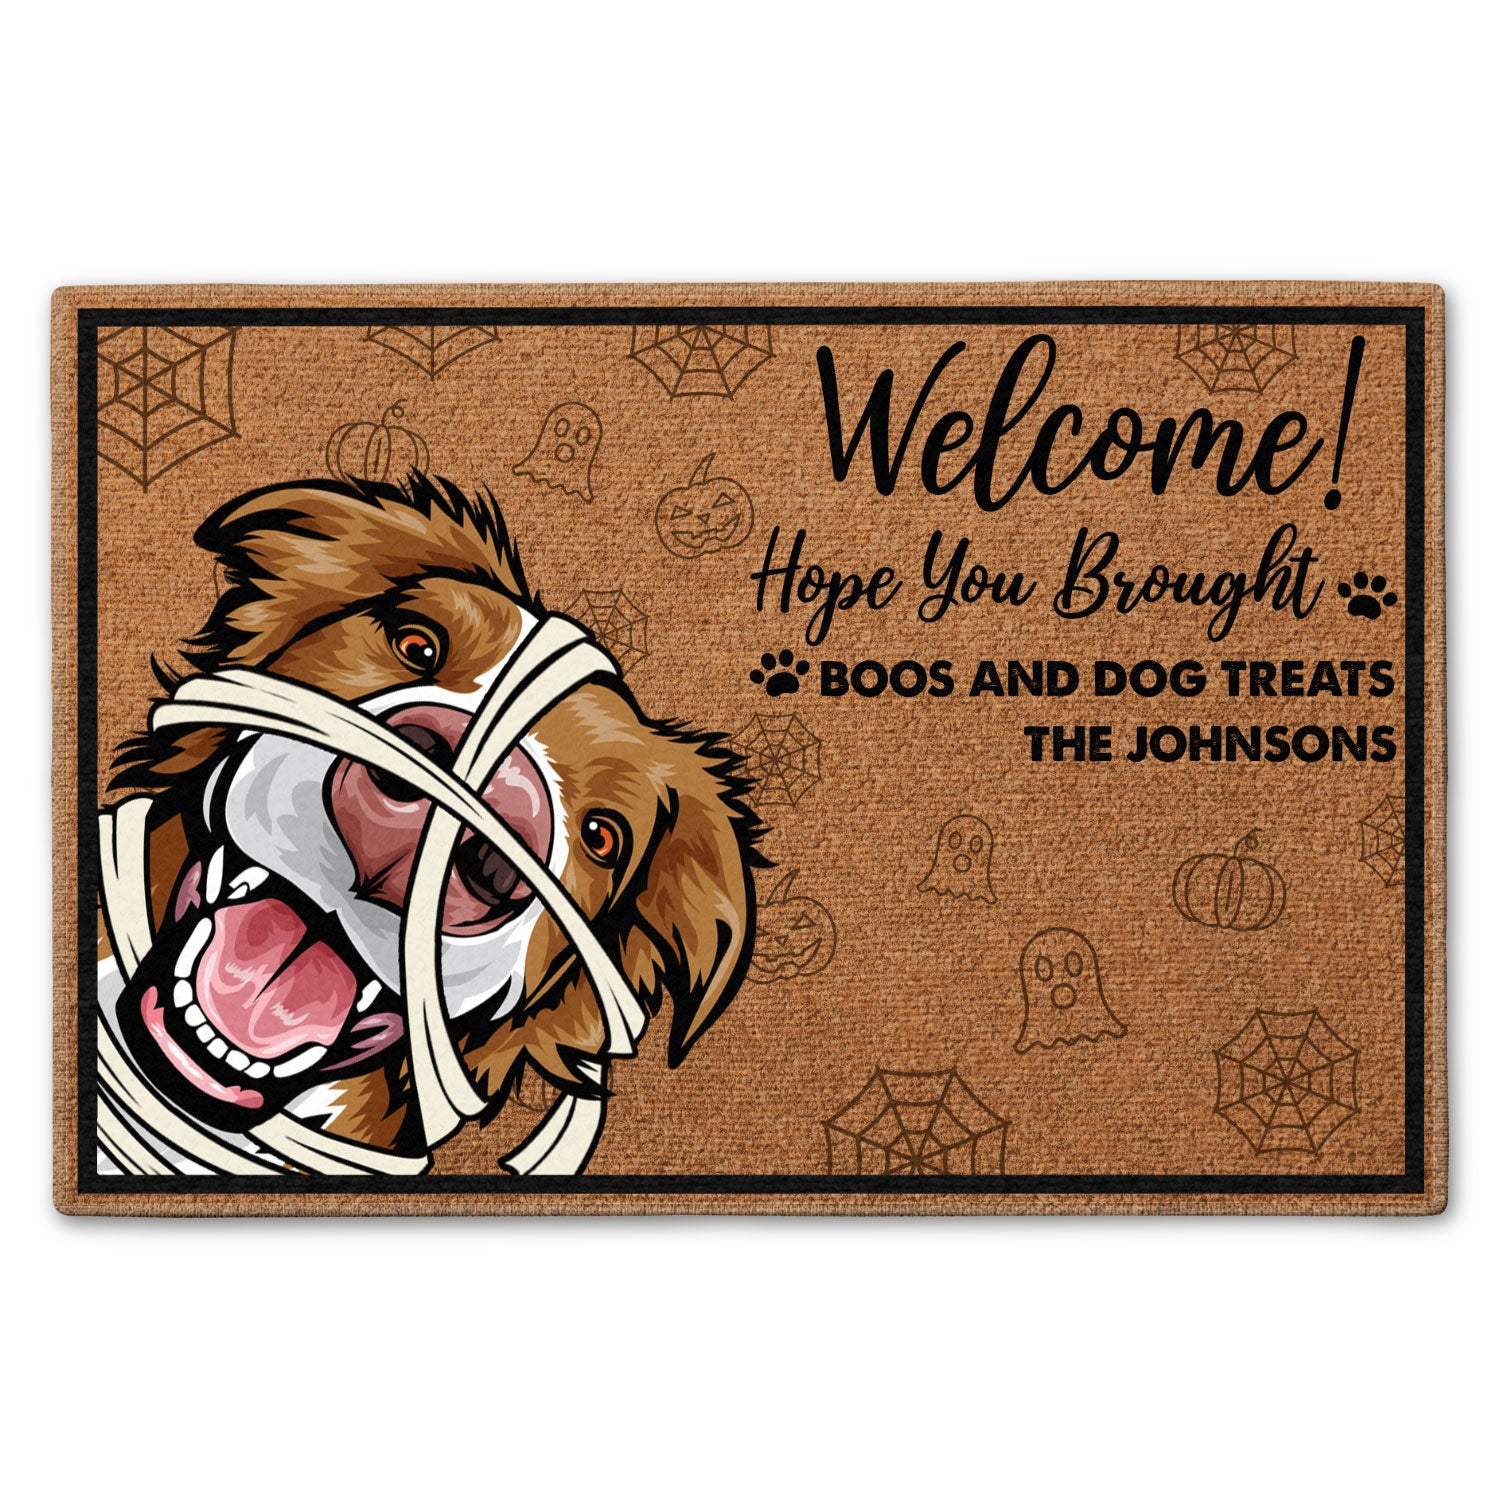 Welcome Hope You Brought Boos And Dog Treats - Halloween Home Decor Gift For Dog Lovers - Personalized Doormat